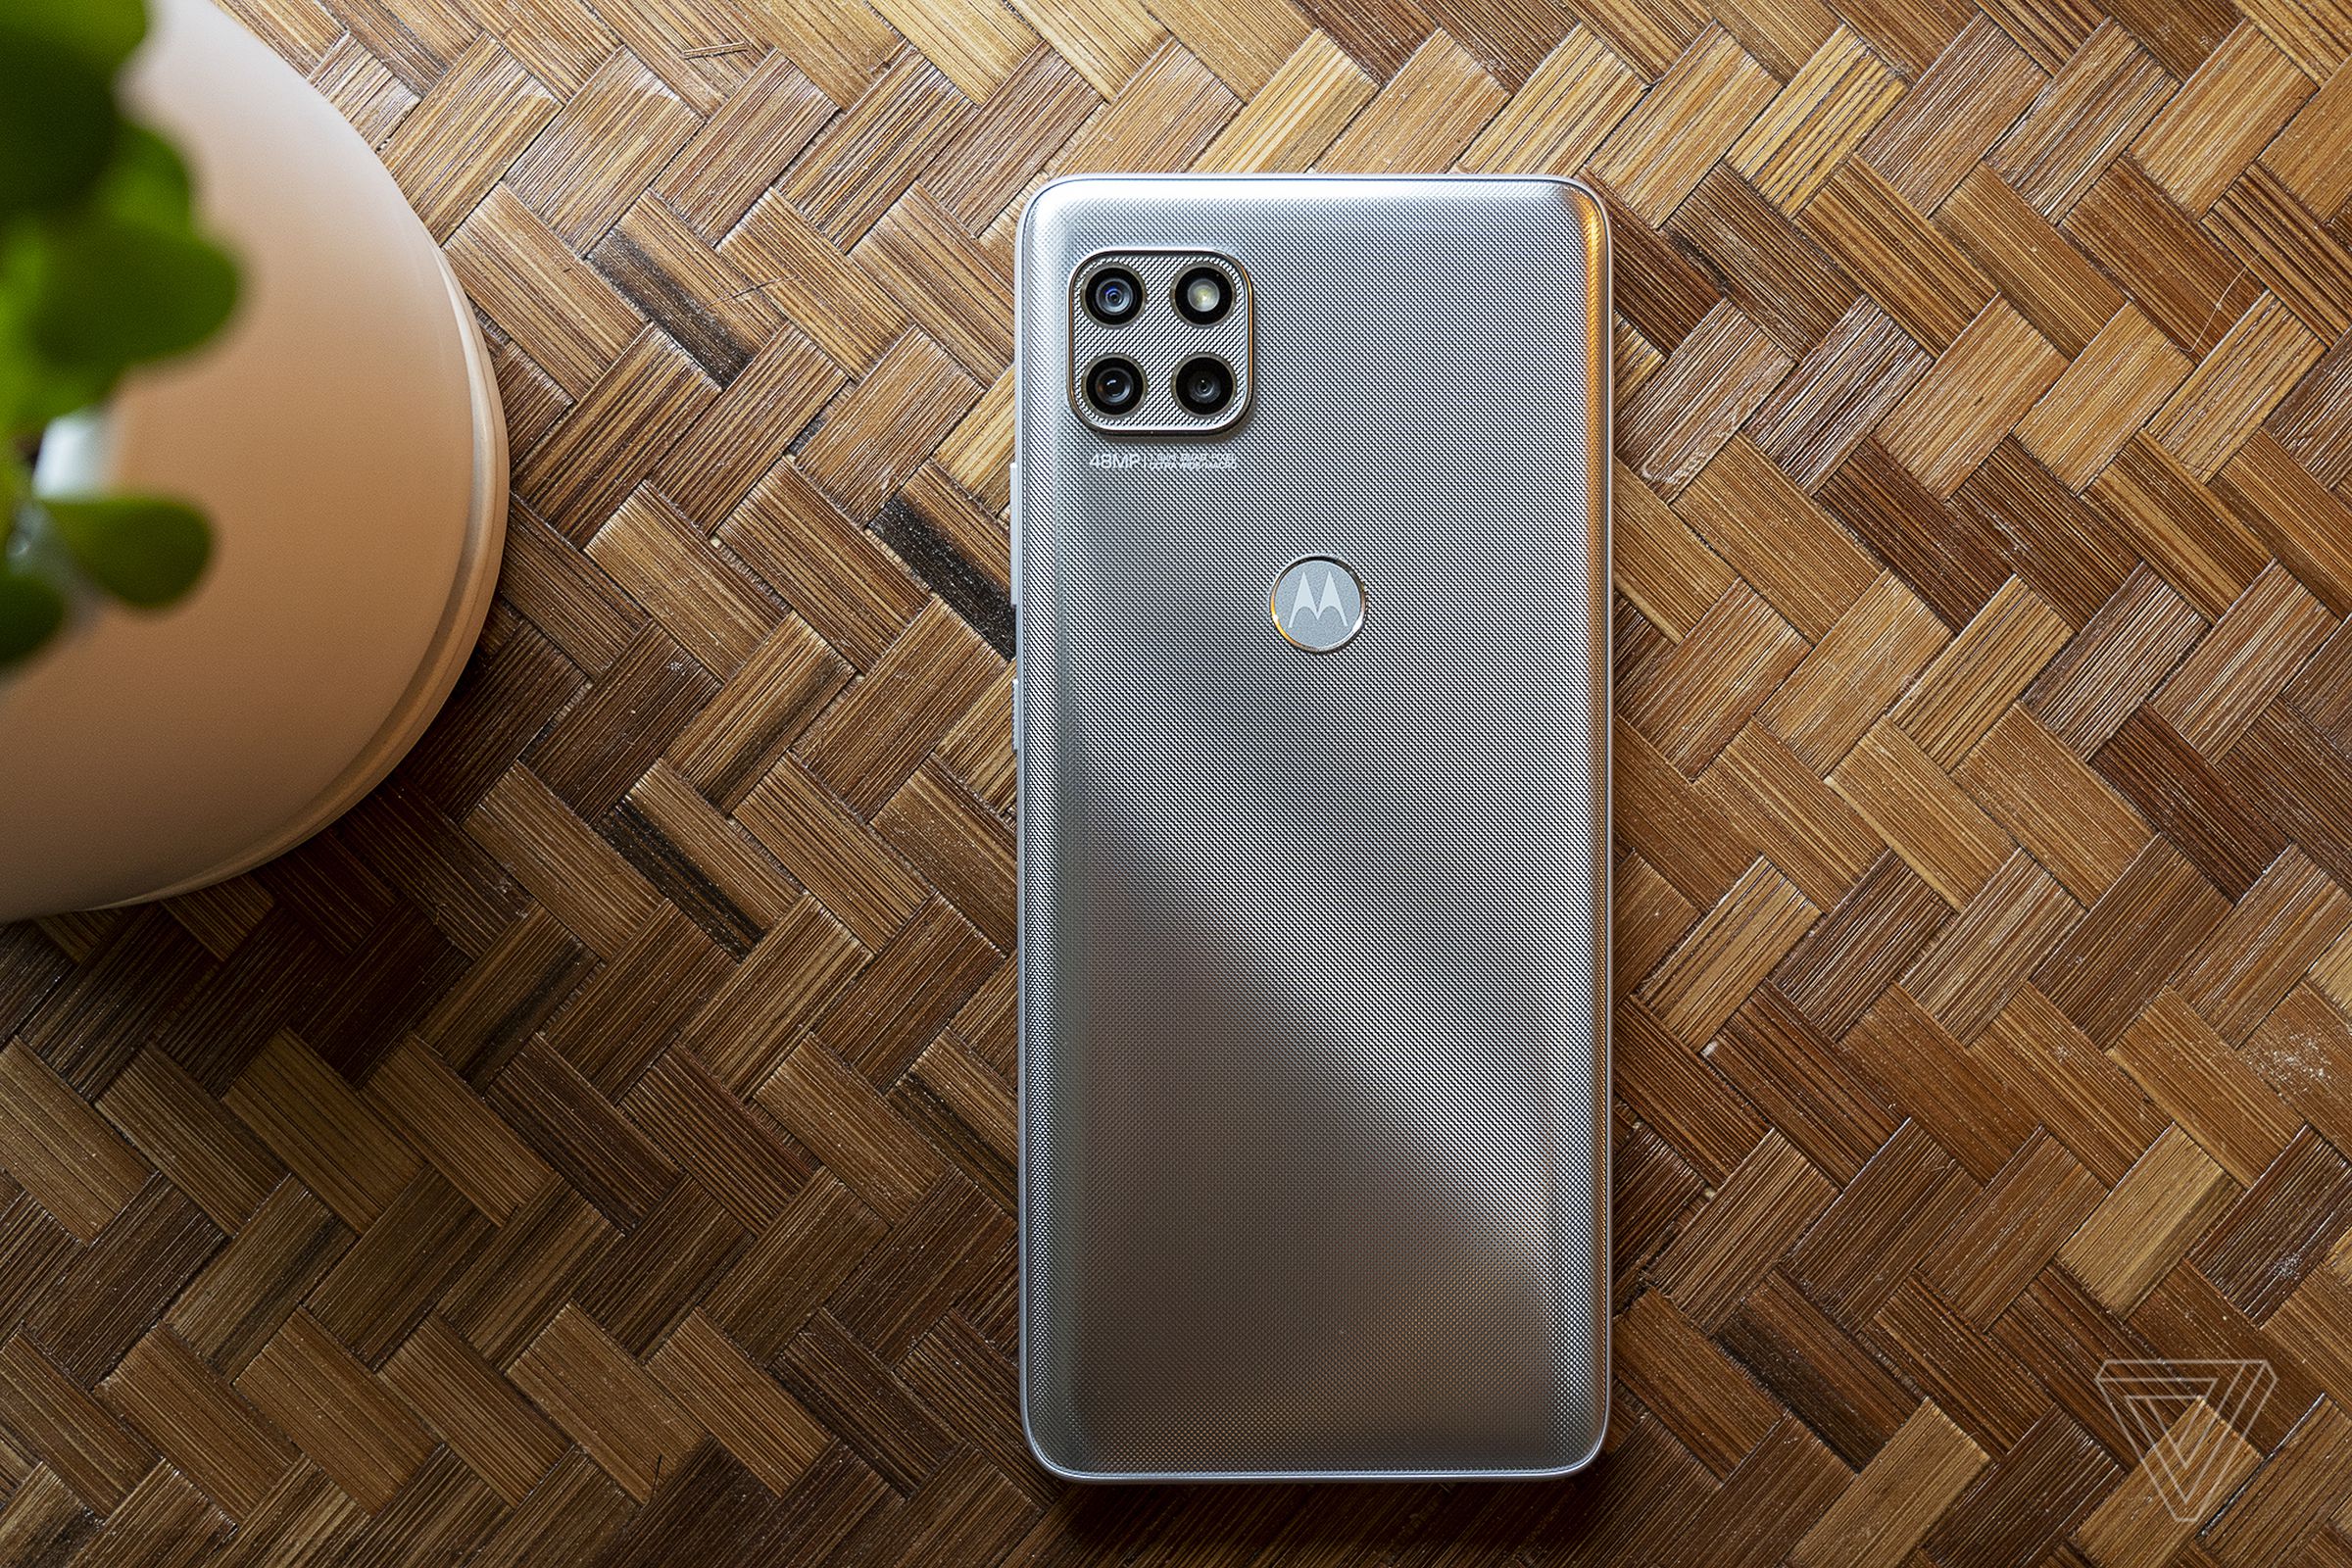 The rear camera bump includes a wide, ultrawide, macro, and a flash.